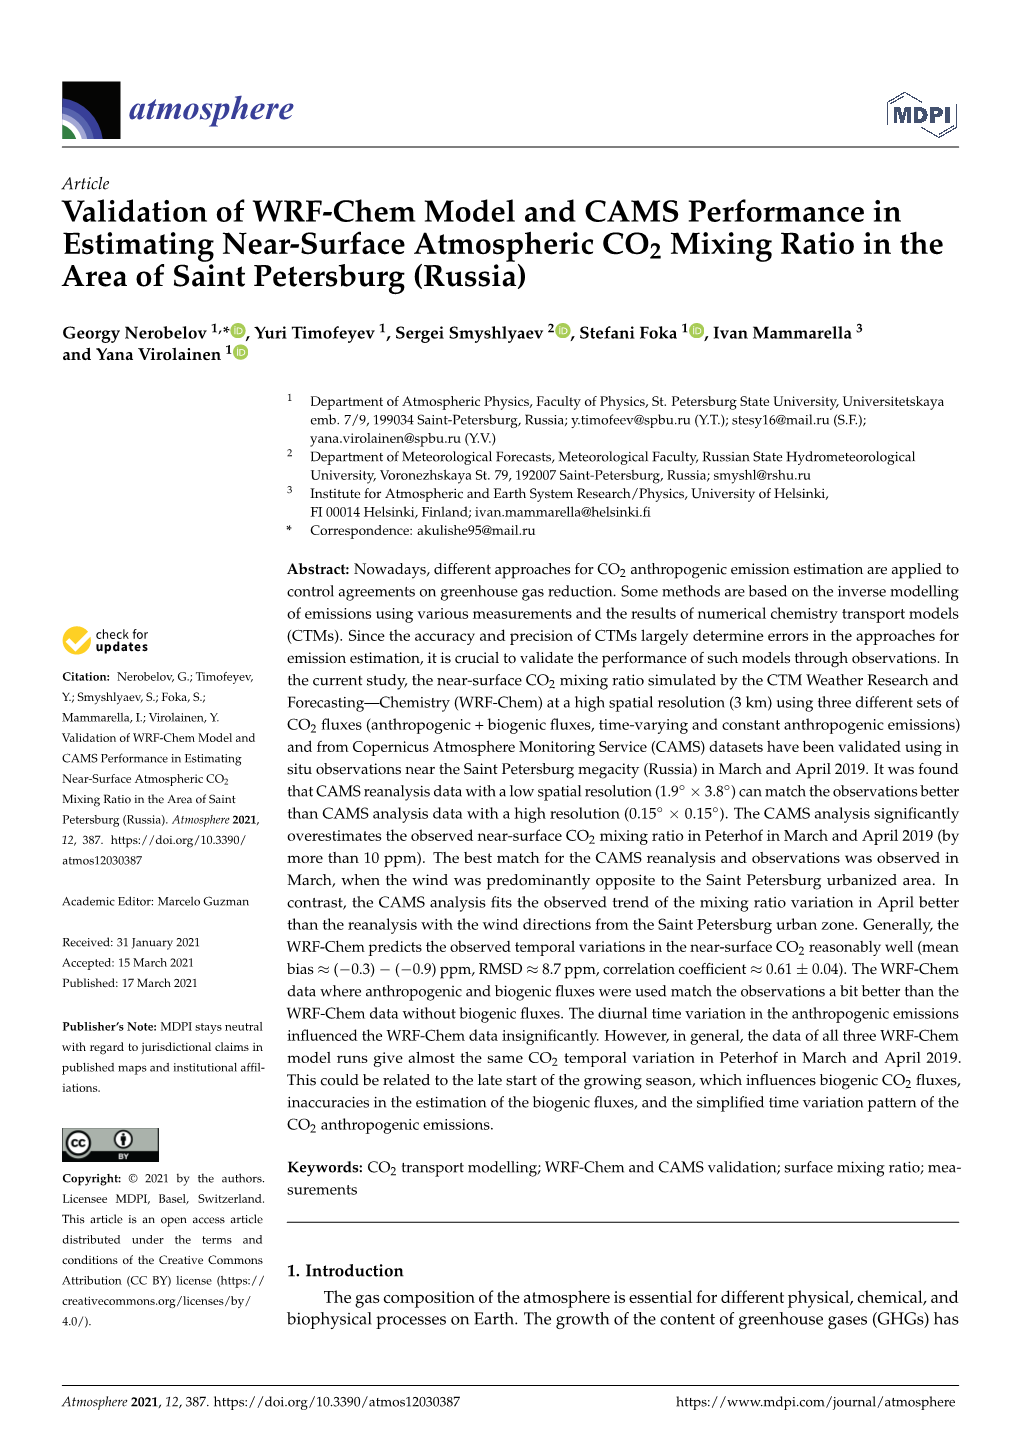 Validation of WRF-Chem Model and CAMS Performance in Estimating Near-Surface Atmospheric CO2 Mixing Ratio in the Area of Saint Petersburg (Russia)